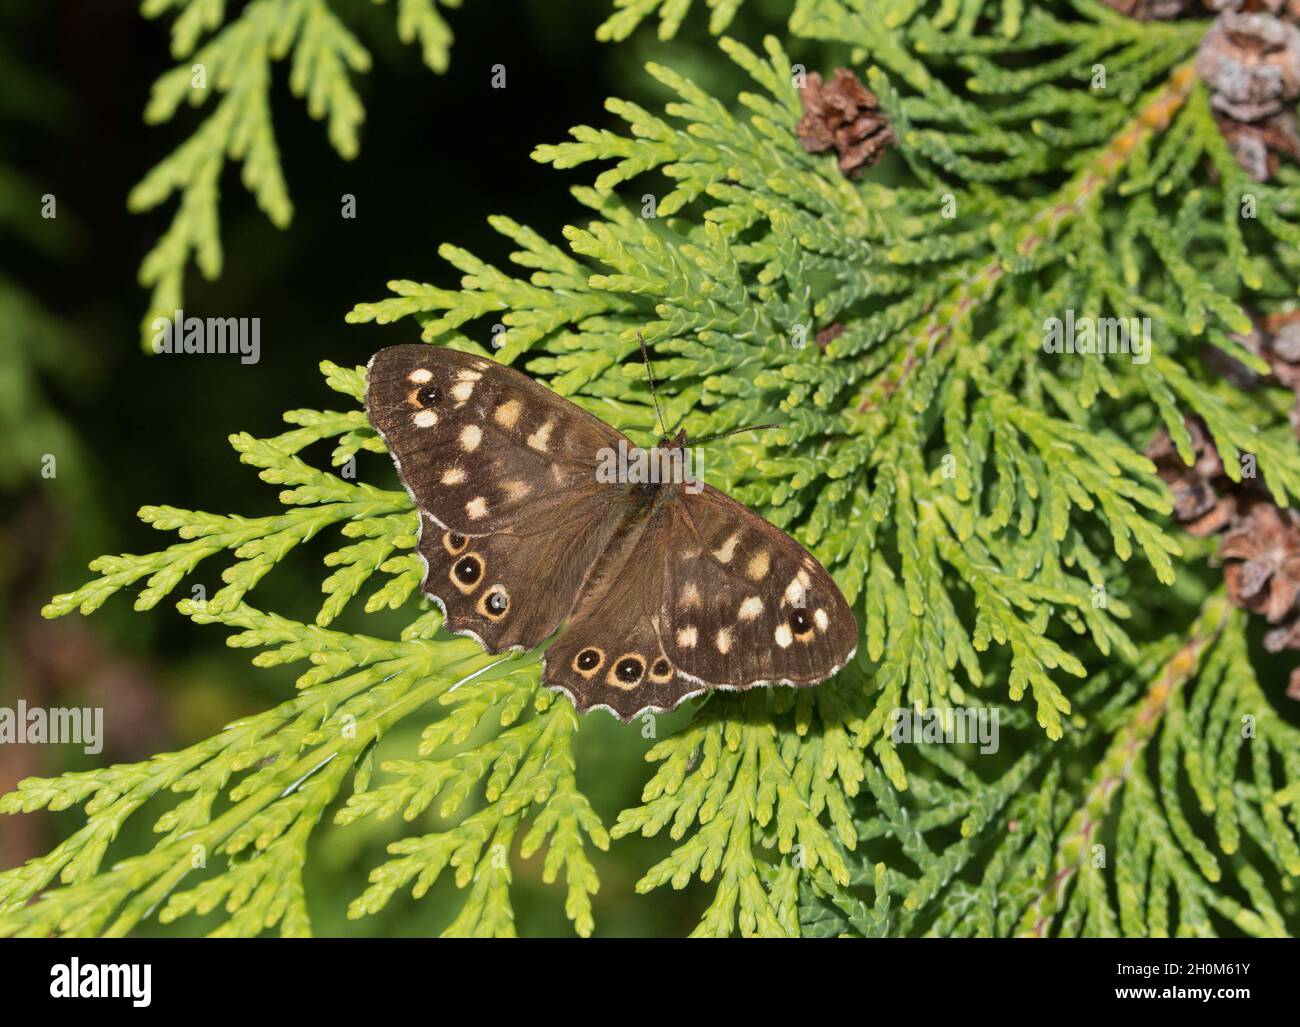 Speckled Wood Butterfly, Pararge aegeria, resting on conifer leaves. Worcestershire, UK. Stock Photo